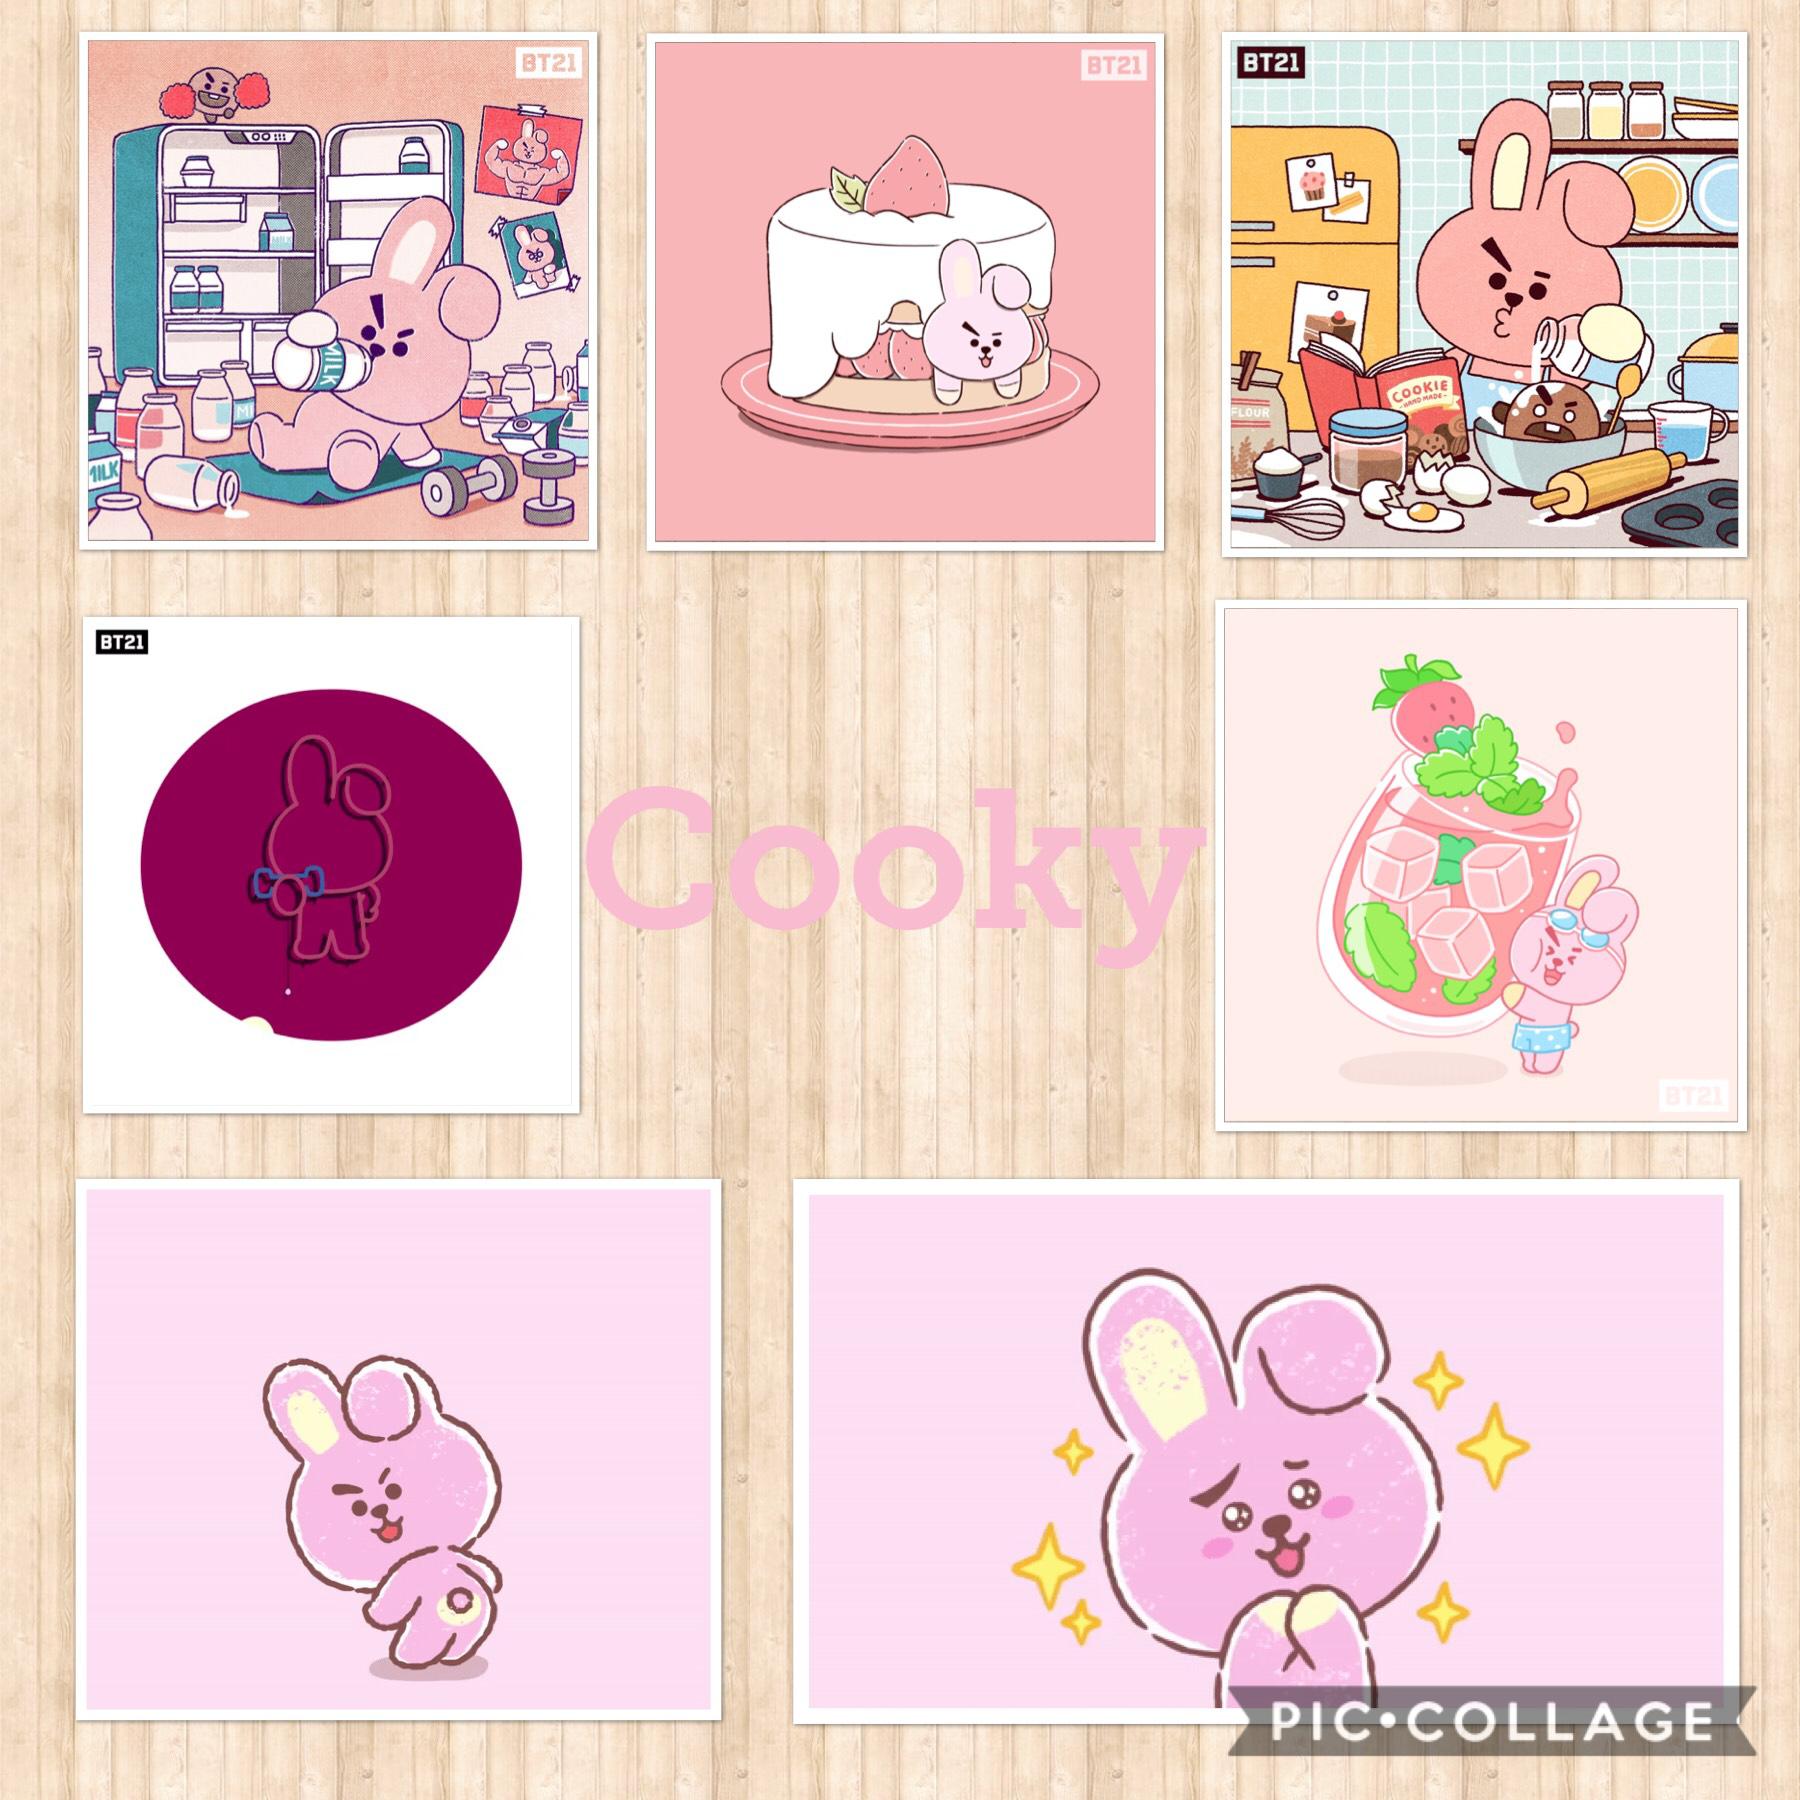 Cooky from BT21